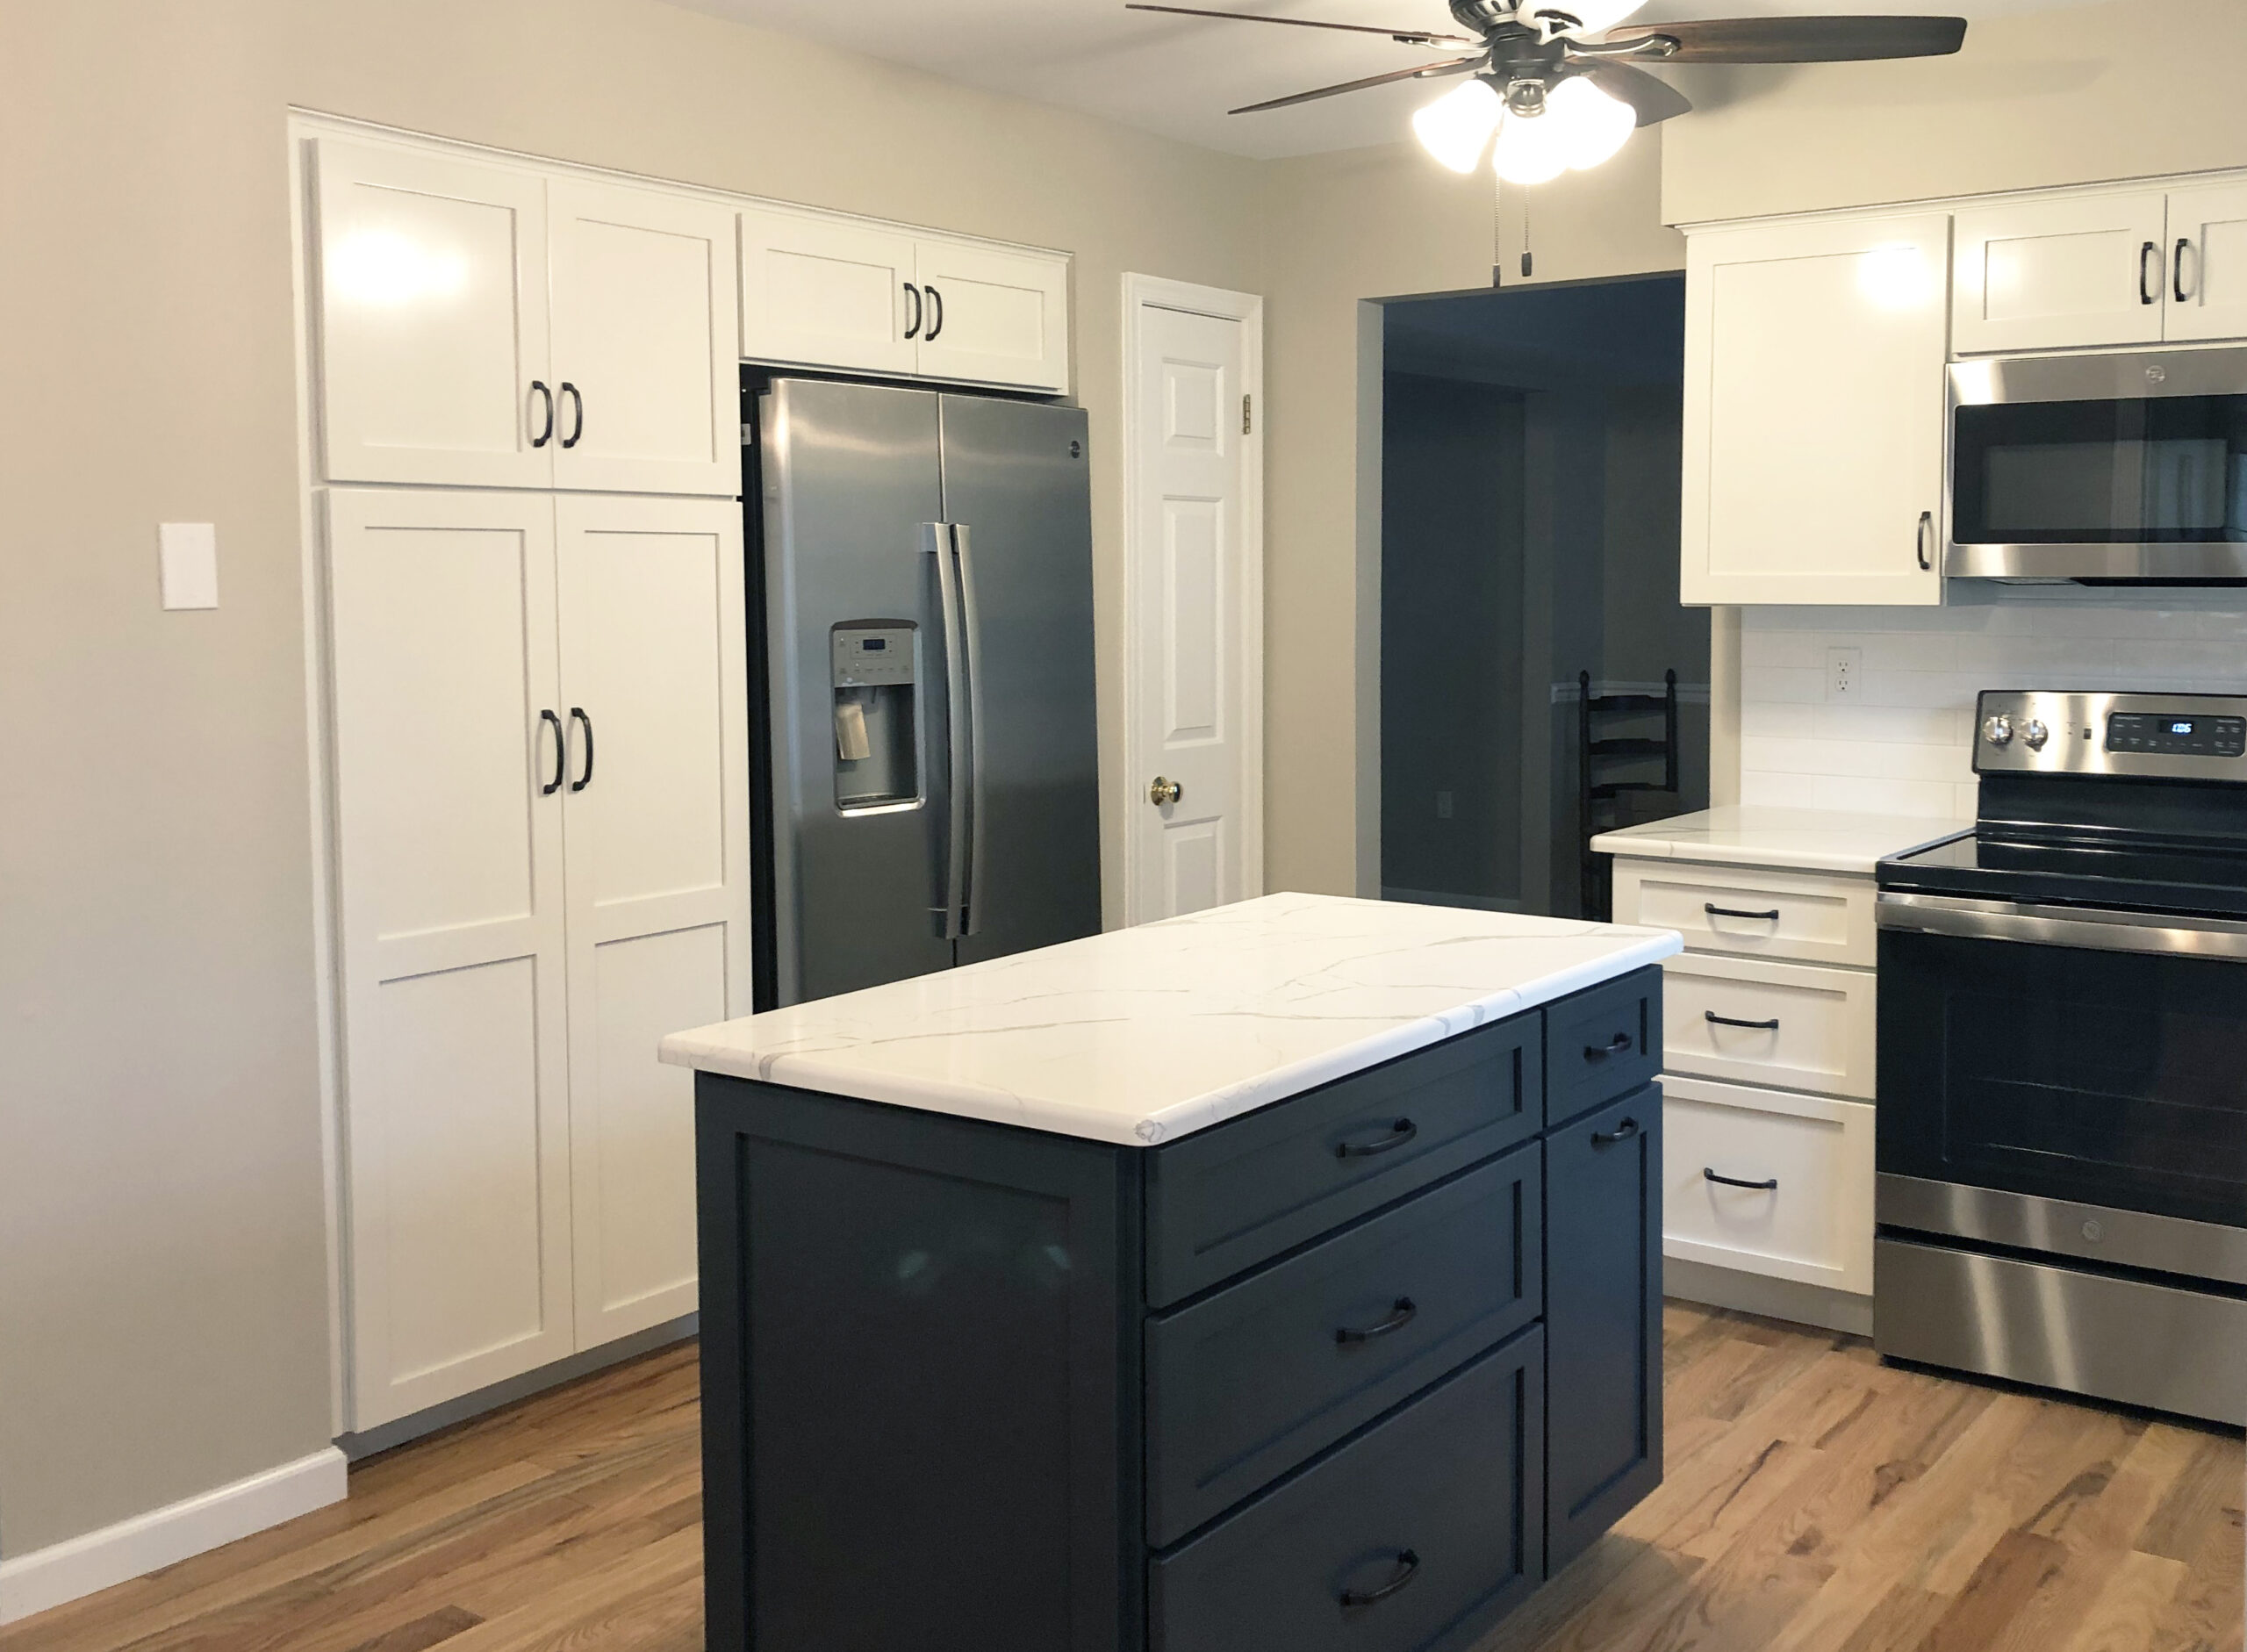 Home remodeling project featuring a kitchen with white cabinets, white quartz countertops, and a blue island